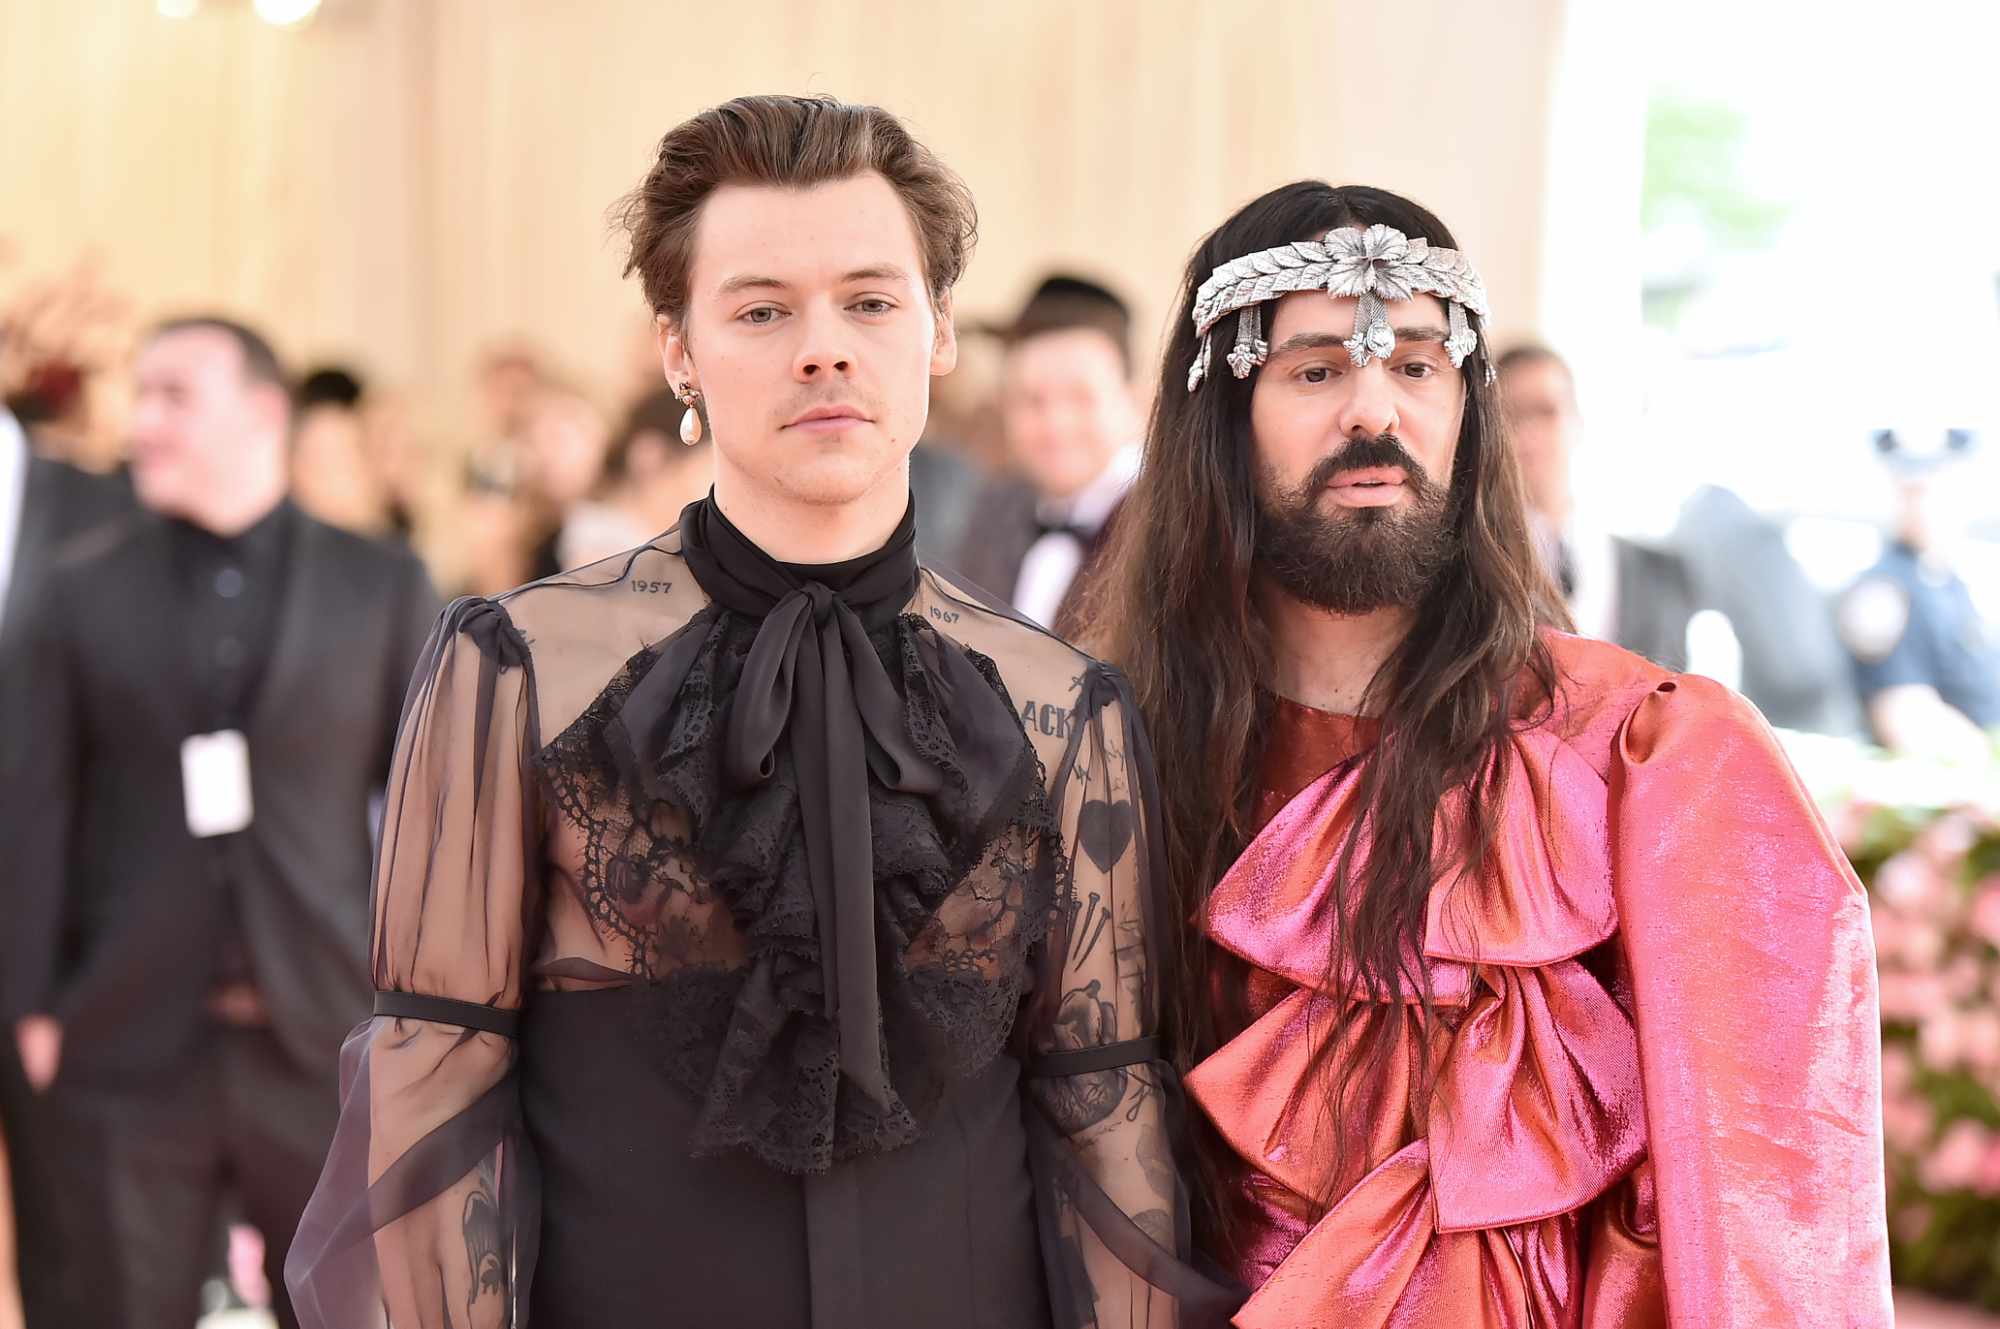 Harry Styles wearing a see-through black top stands next to Alessandro Michele, former Gucci creative director, wearing a red shirt, at the 2022 Met Gala